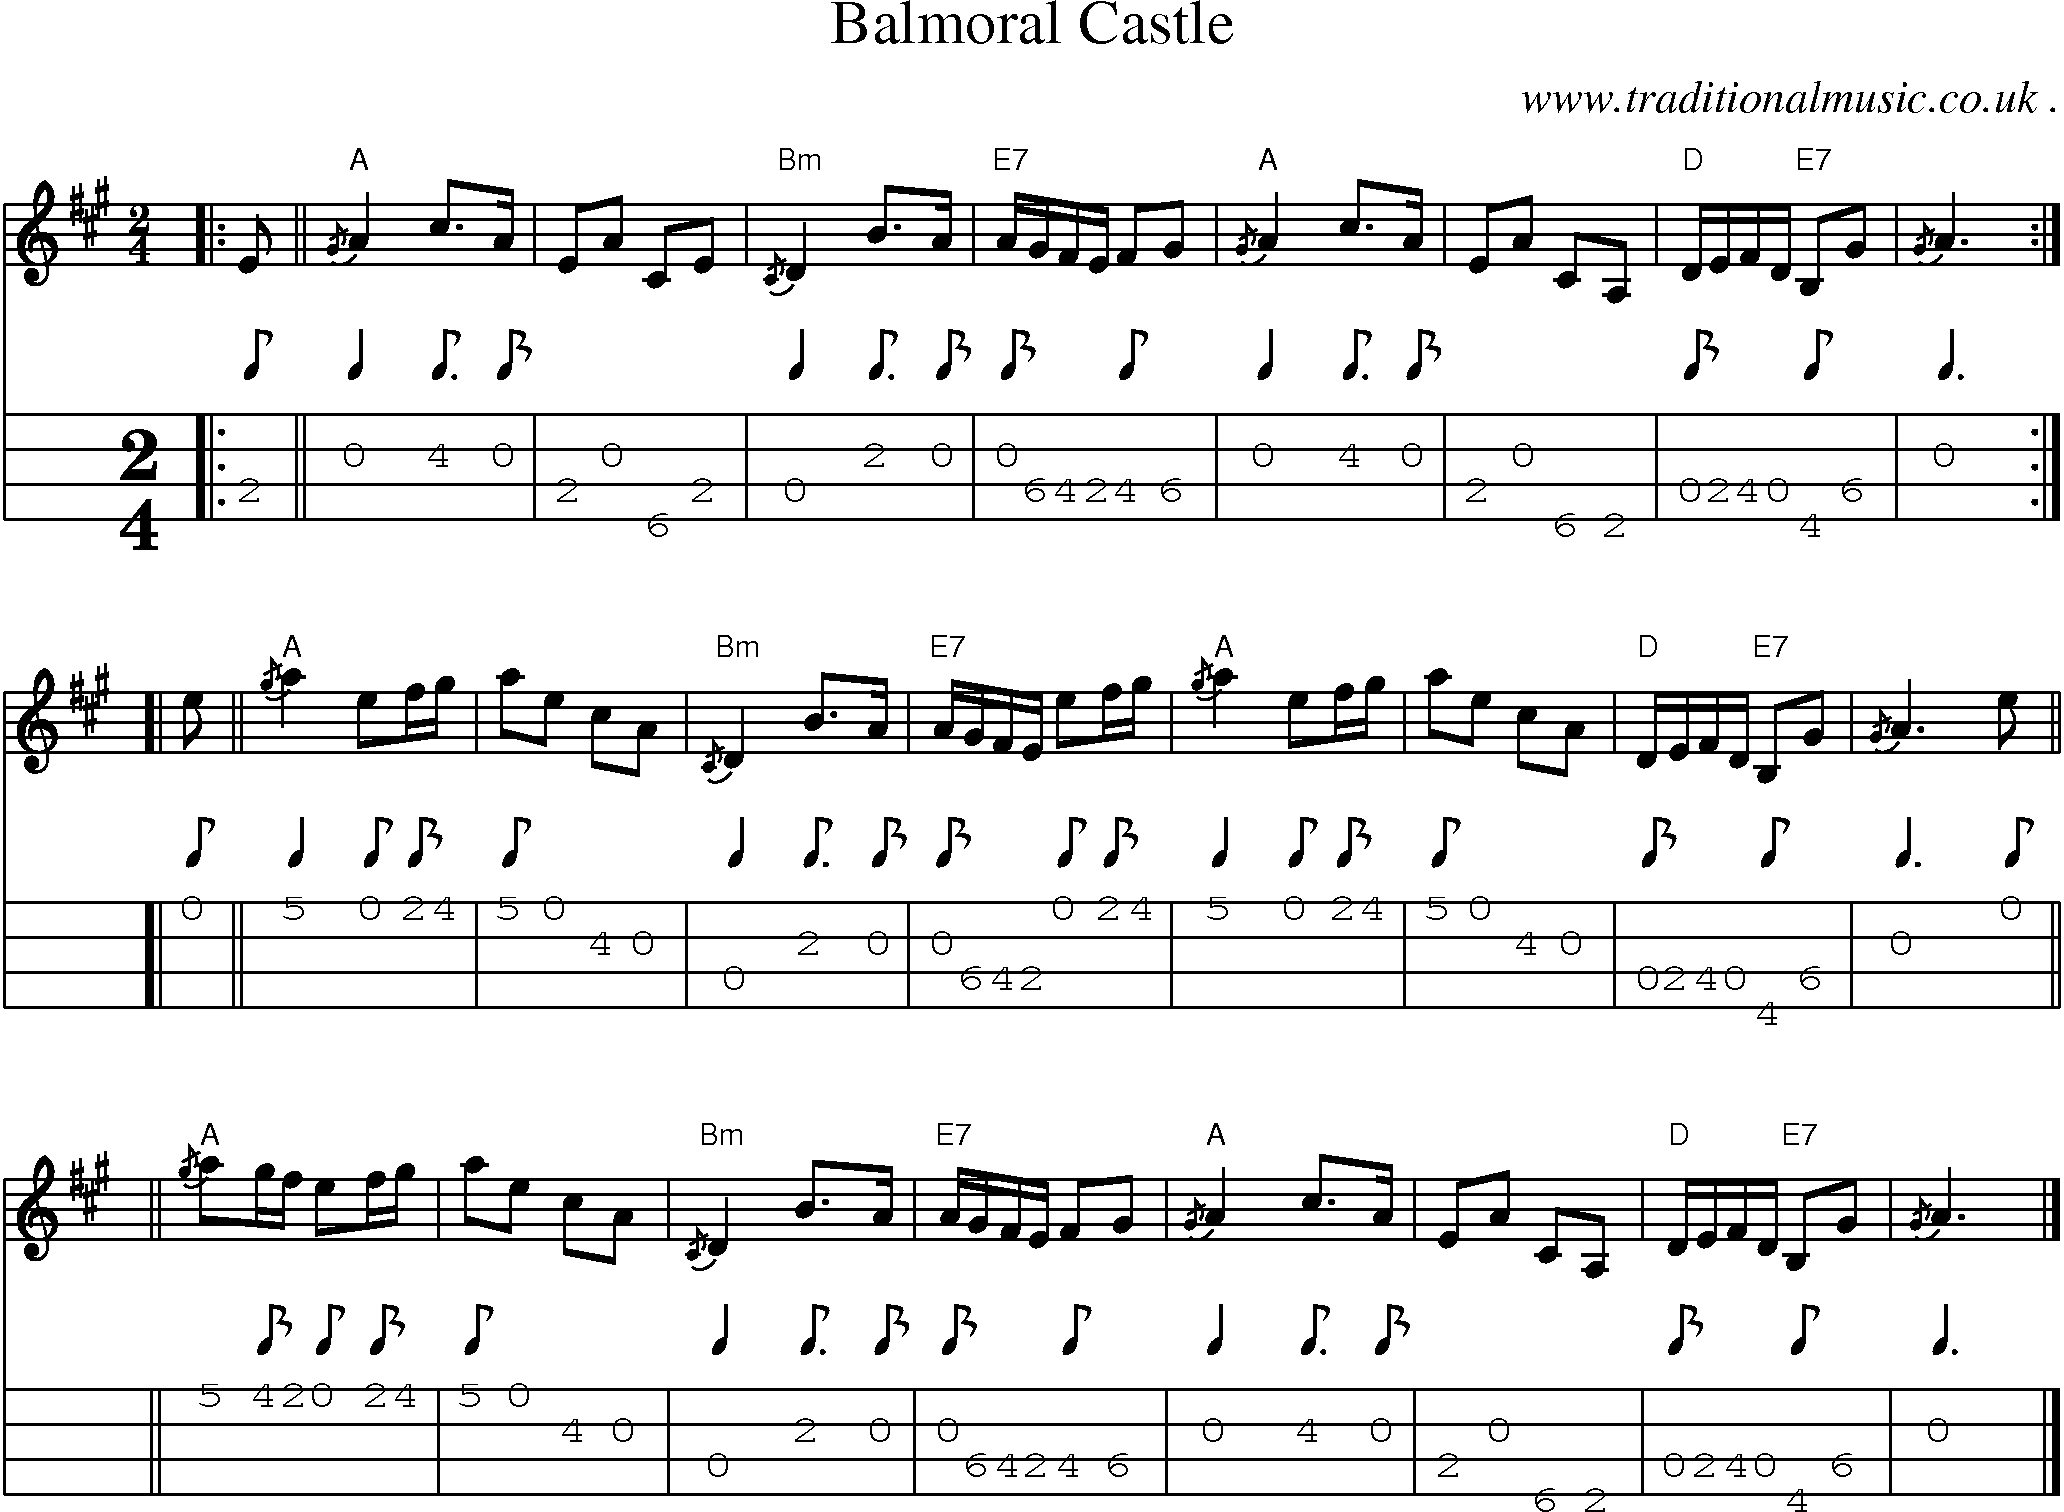 Sheet-music  score, Chords and Mandolin Tabs for Balmoral Castle